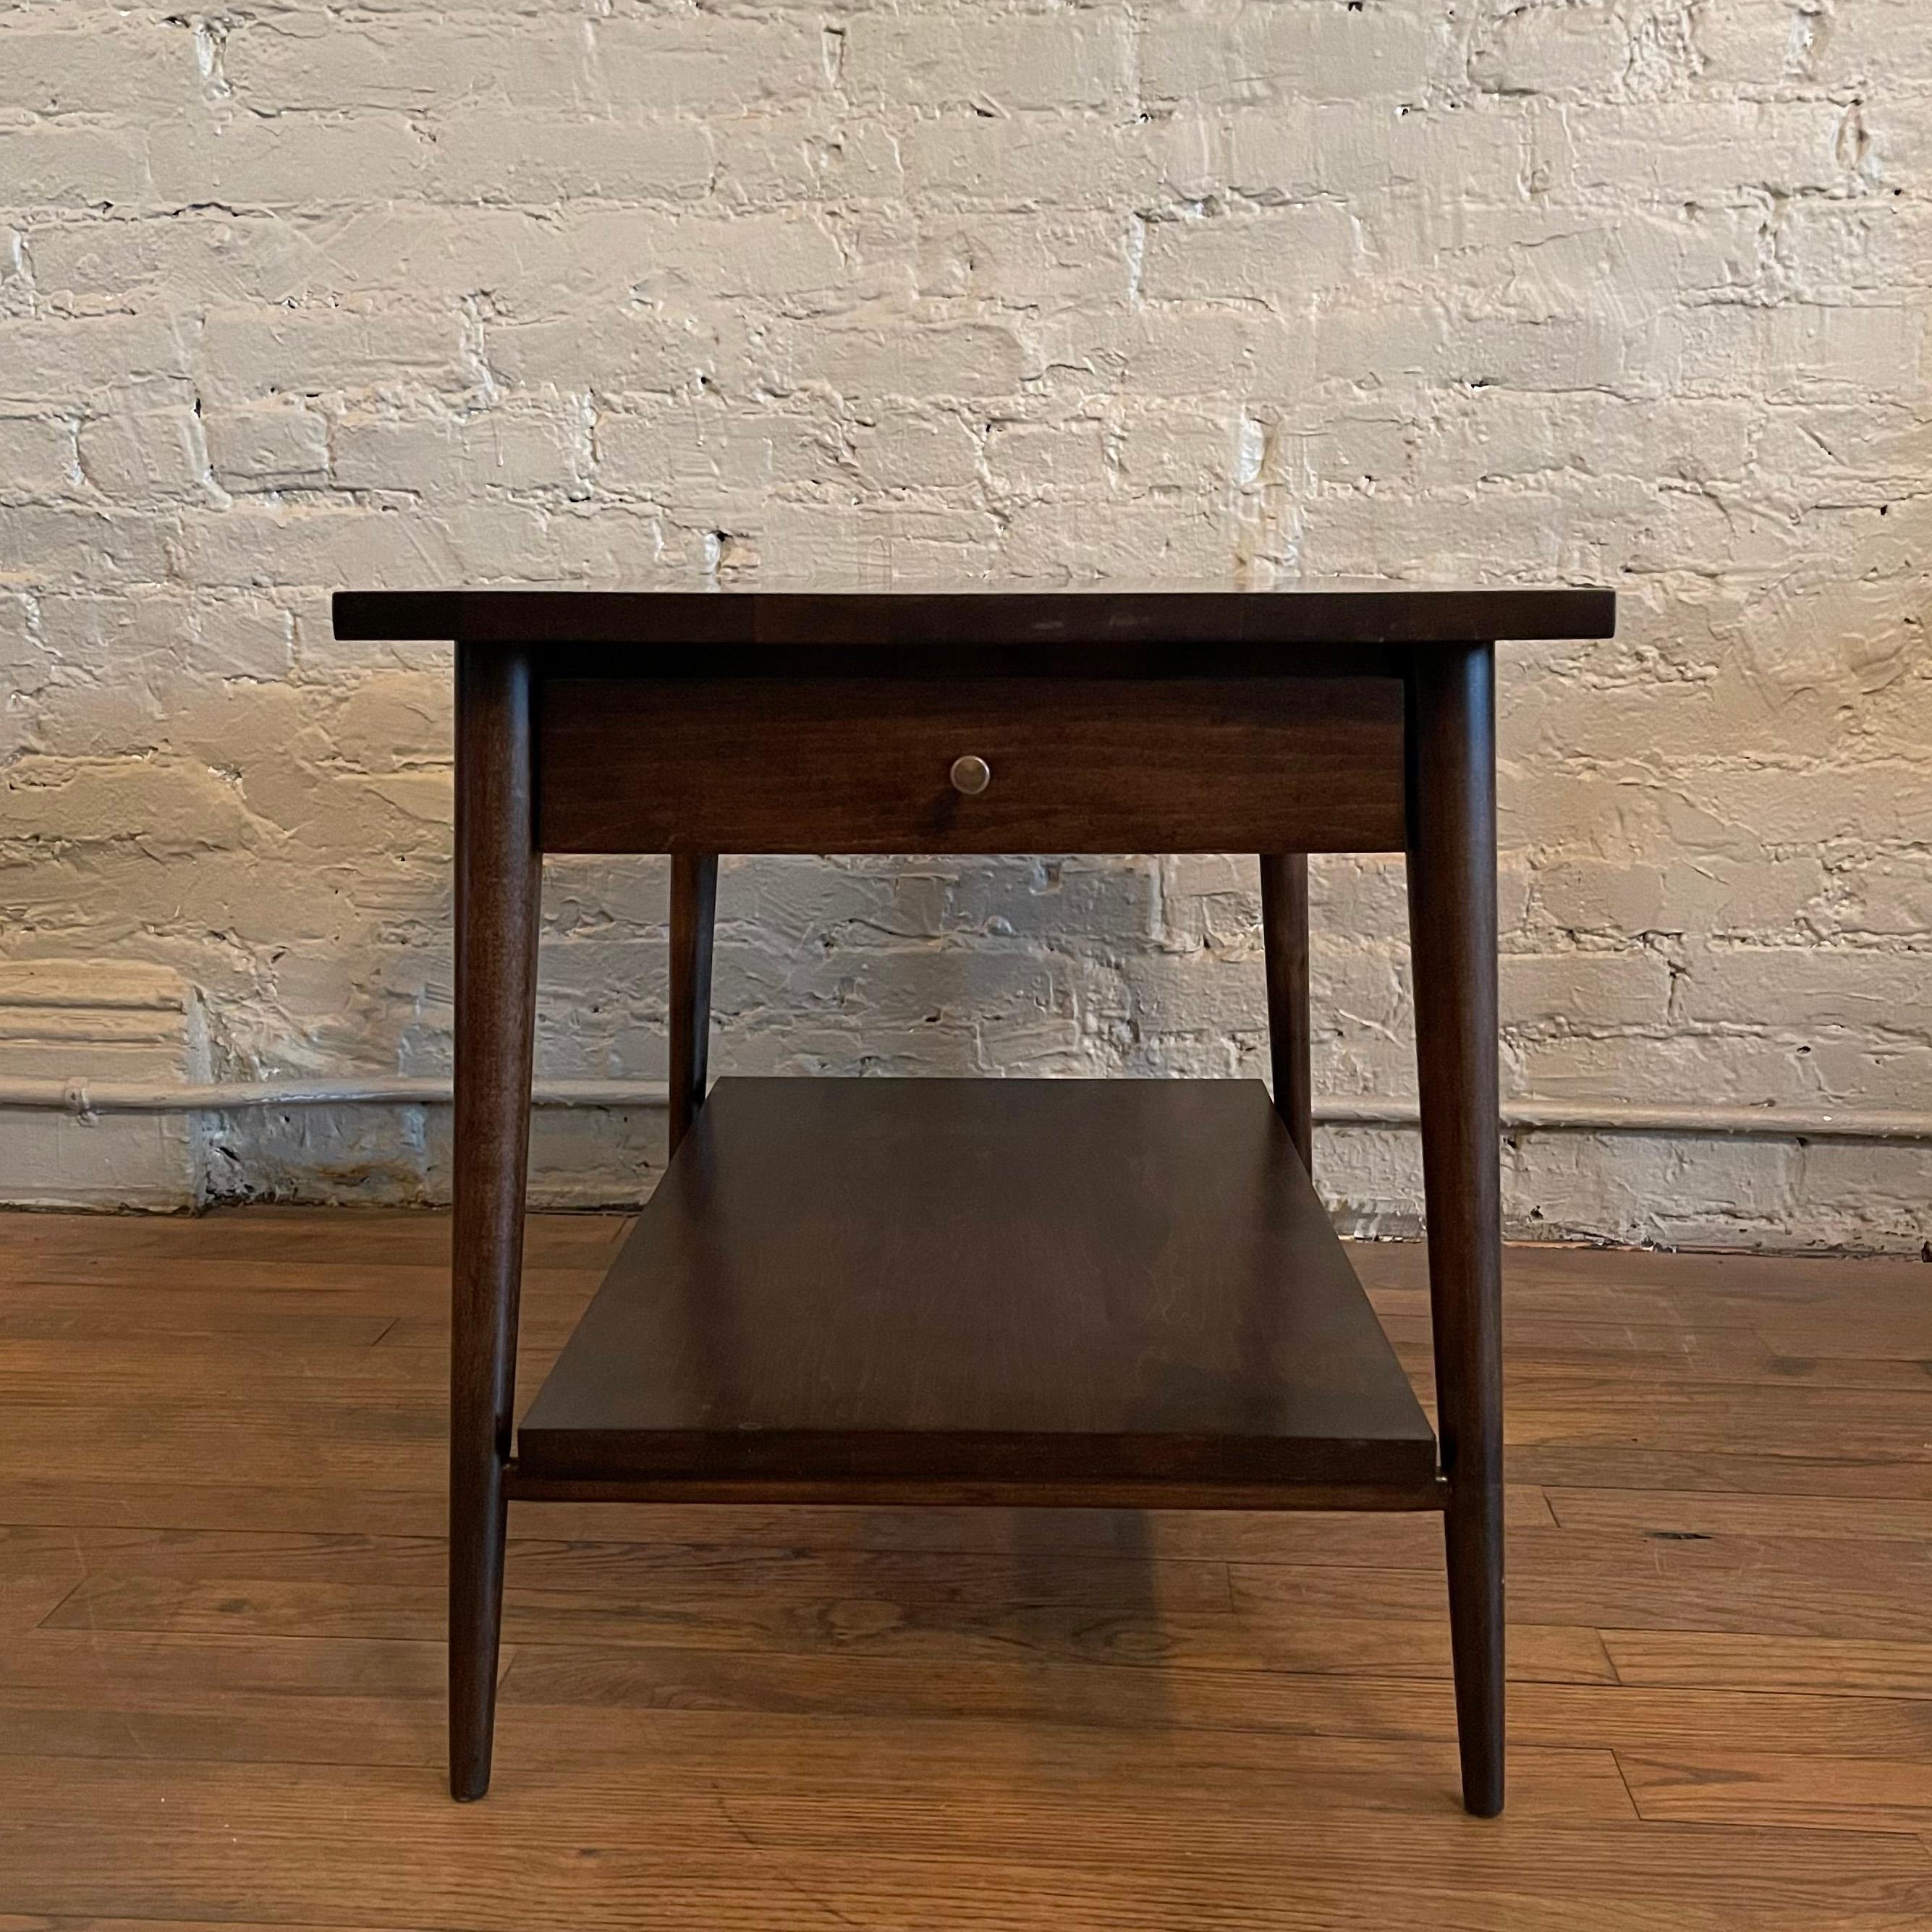 Mid-Century Modern, ebonized maple, side table with drawer by Paul McCobb for Planner Group, Winchendon, features a lower shelf and signature hourglass brass pull.